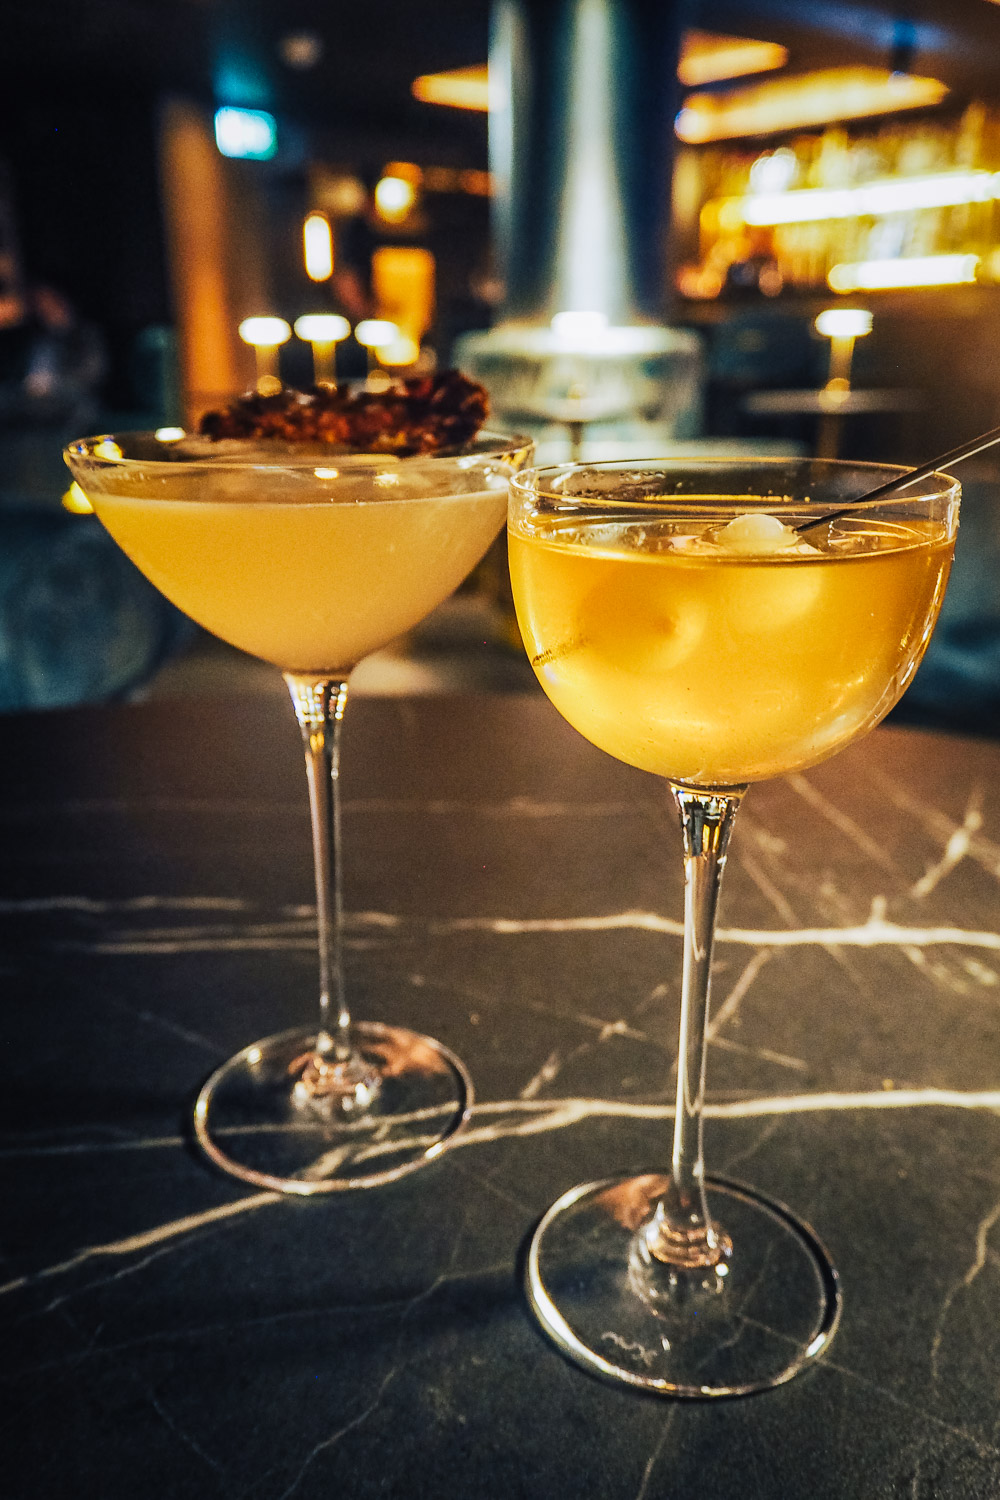 Viajante 87: London's Newest Bar Serving Cutting-Edge Cocktails with a Japanese-Mexican Twist